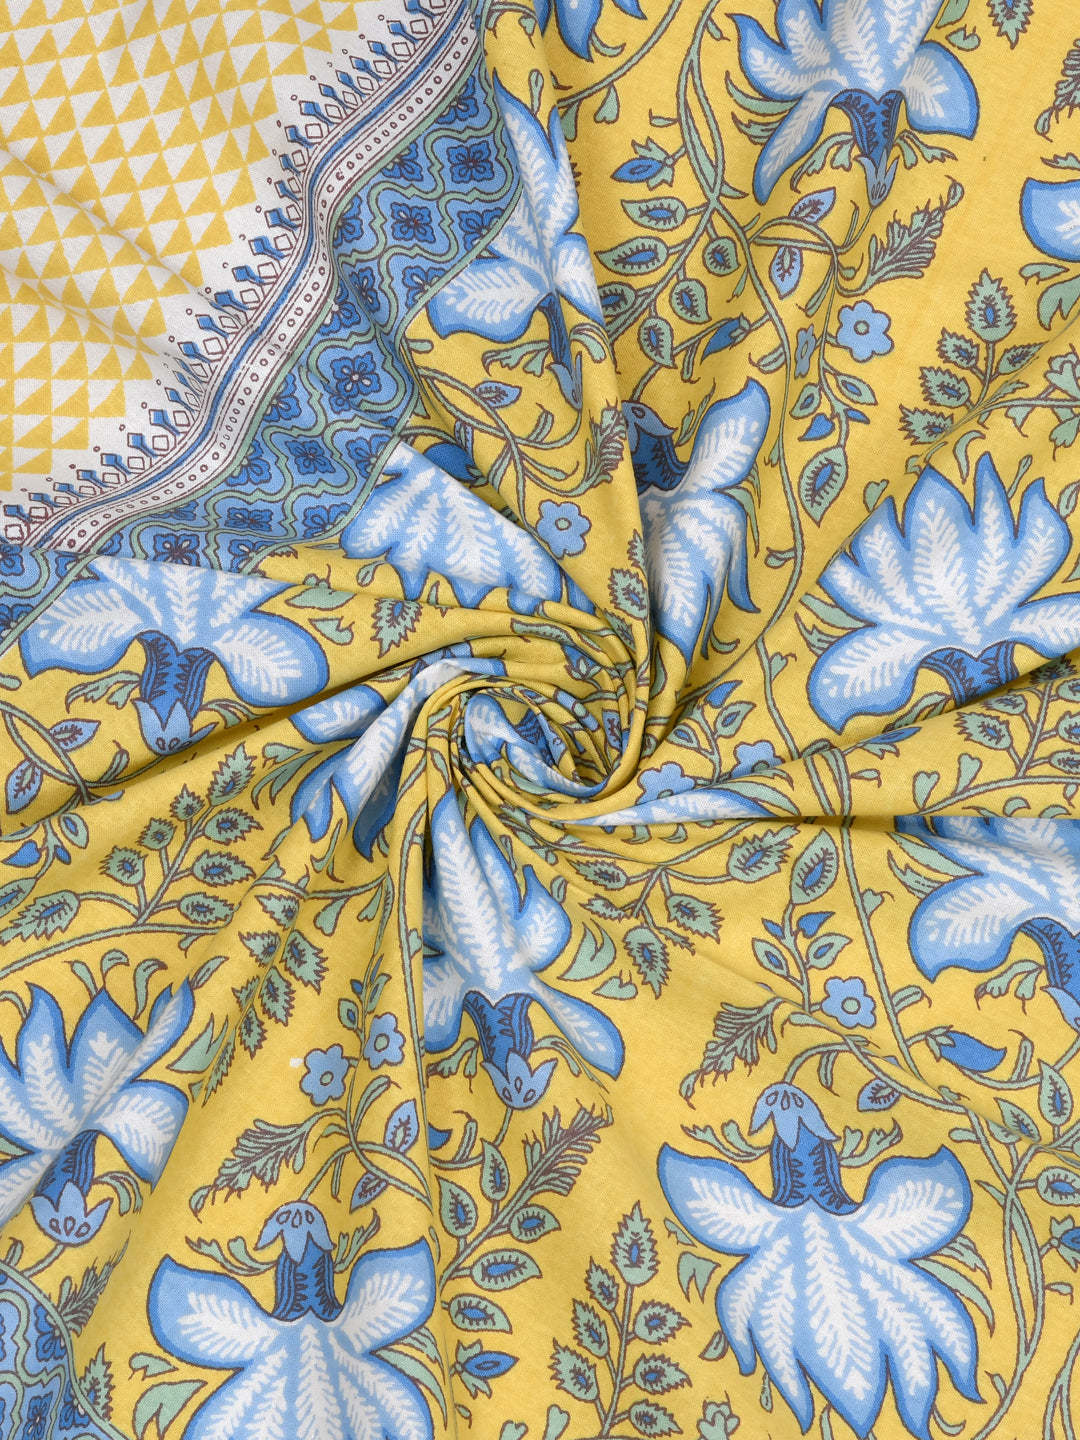 Cotton 220TC King Size Bedsheet With 2 Pillow Covers; White Blue Flowers On Yellow Base